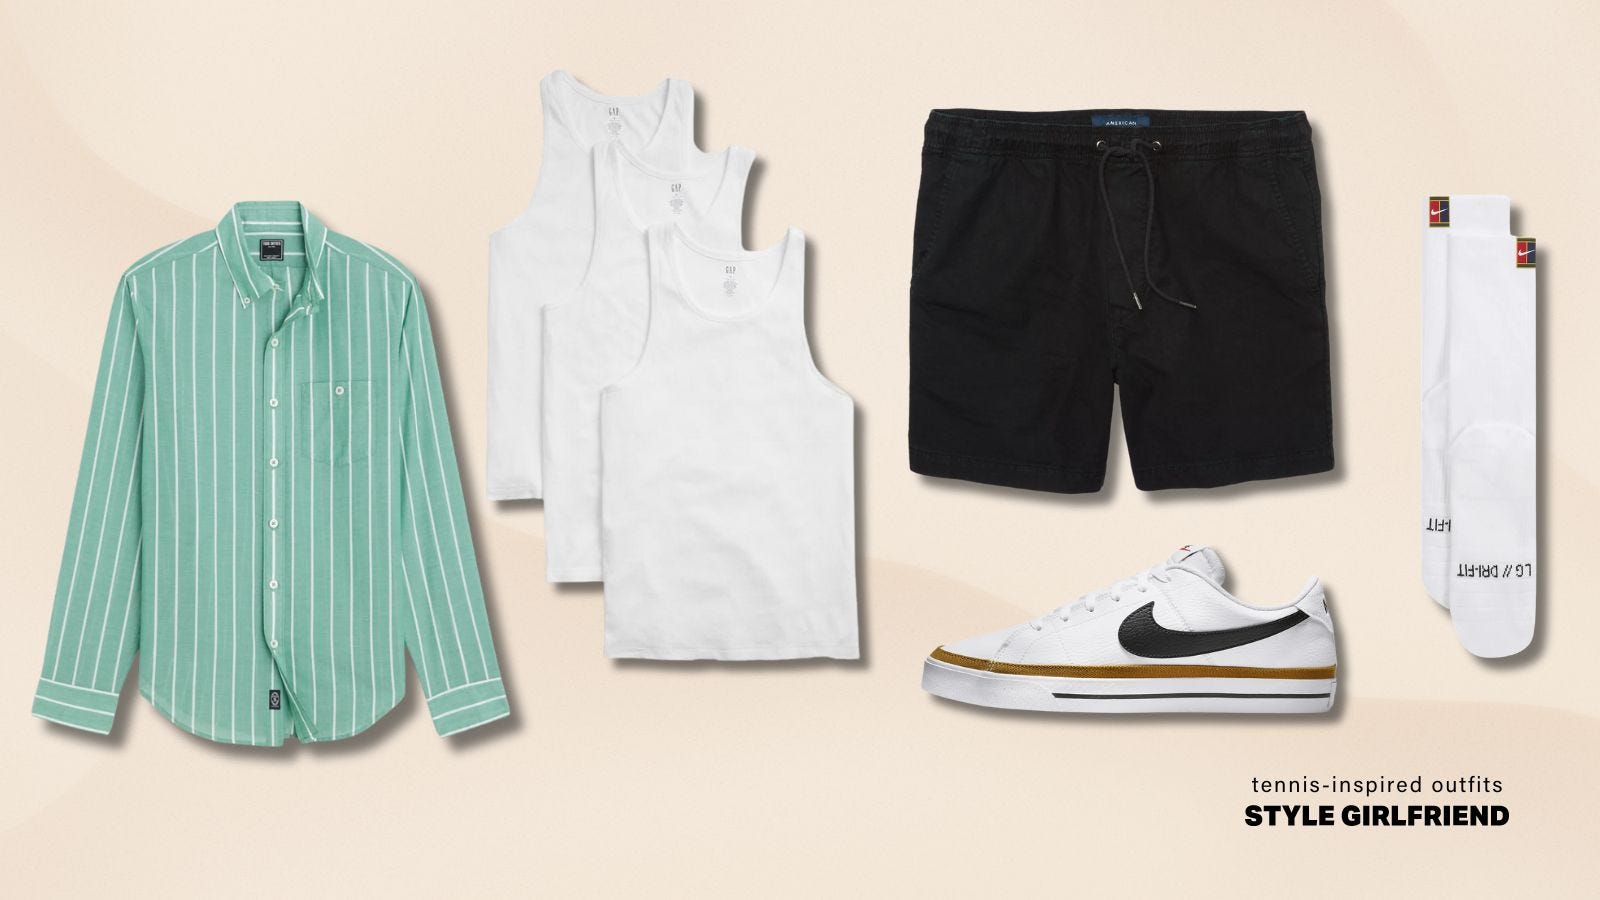 casual men's shorts outfit with green striped shirt, trio of white sleeveless undershirts, black drawstring shorts, tall white socks and white tennis shoes